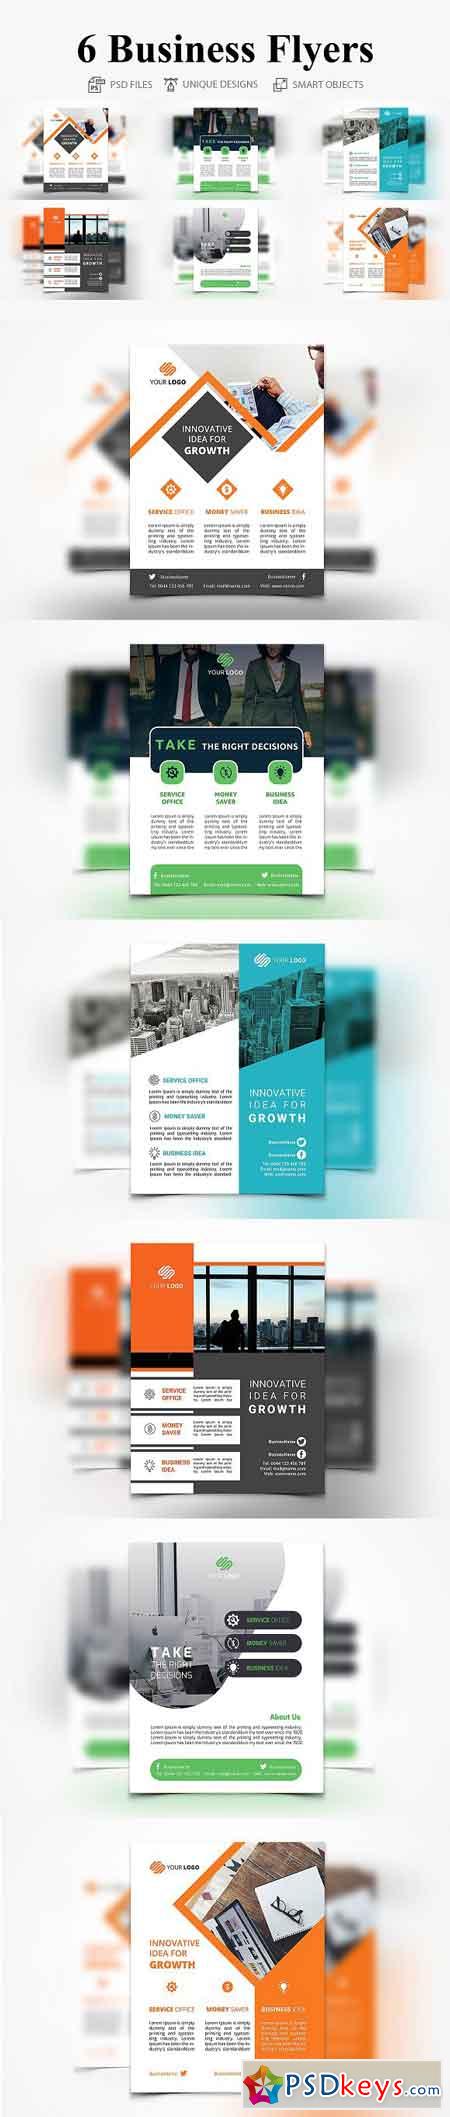 6 Business Flyers 2707937